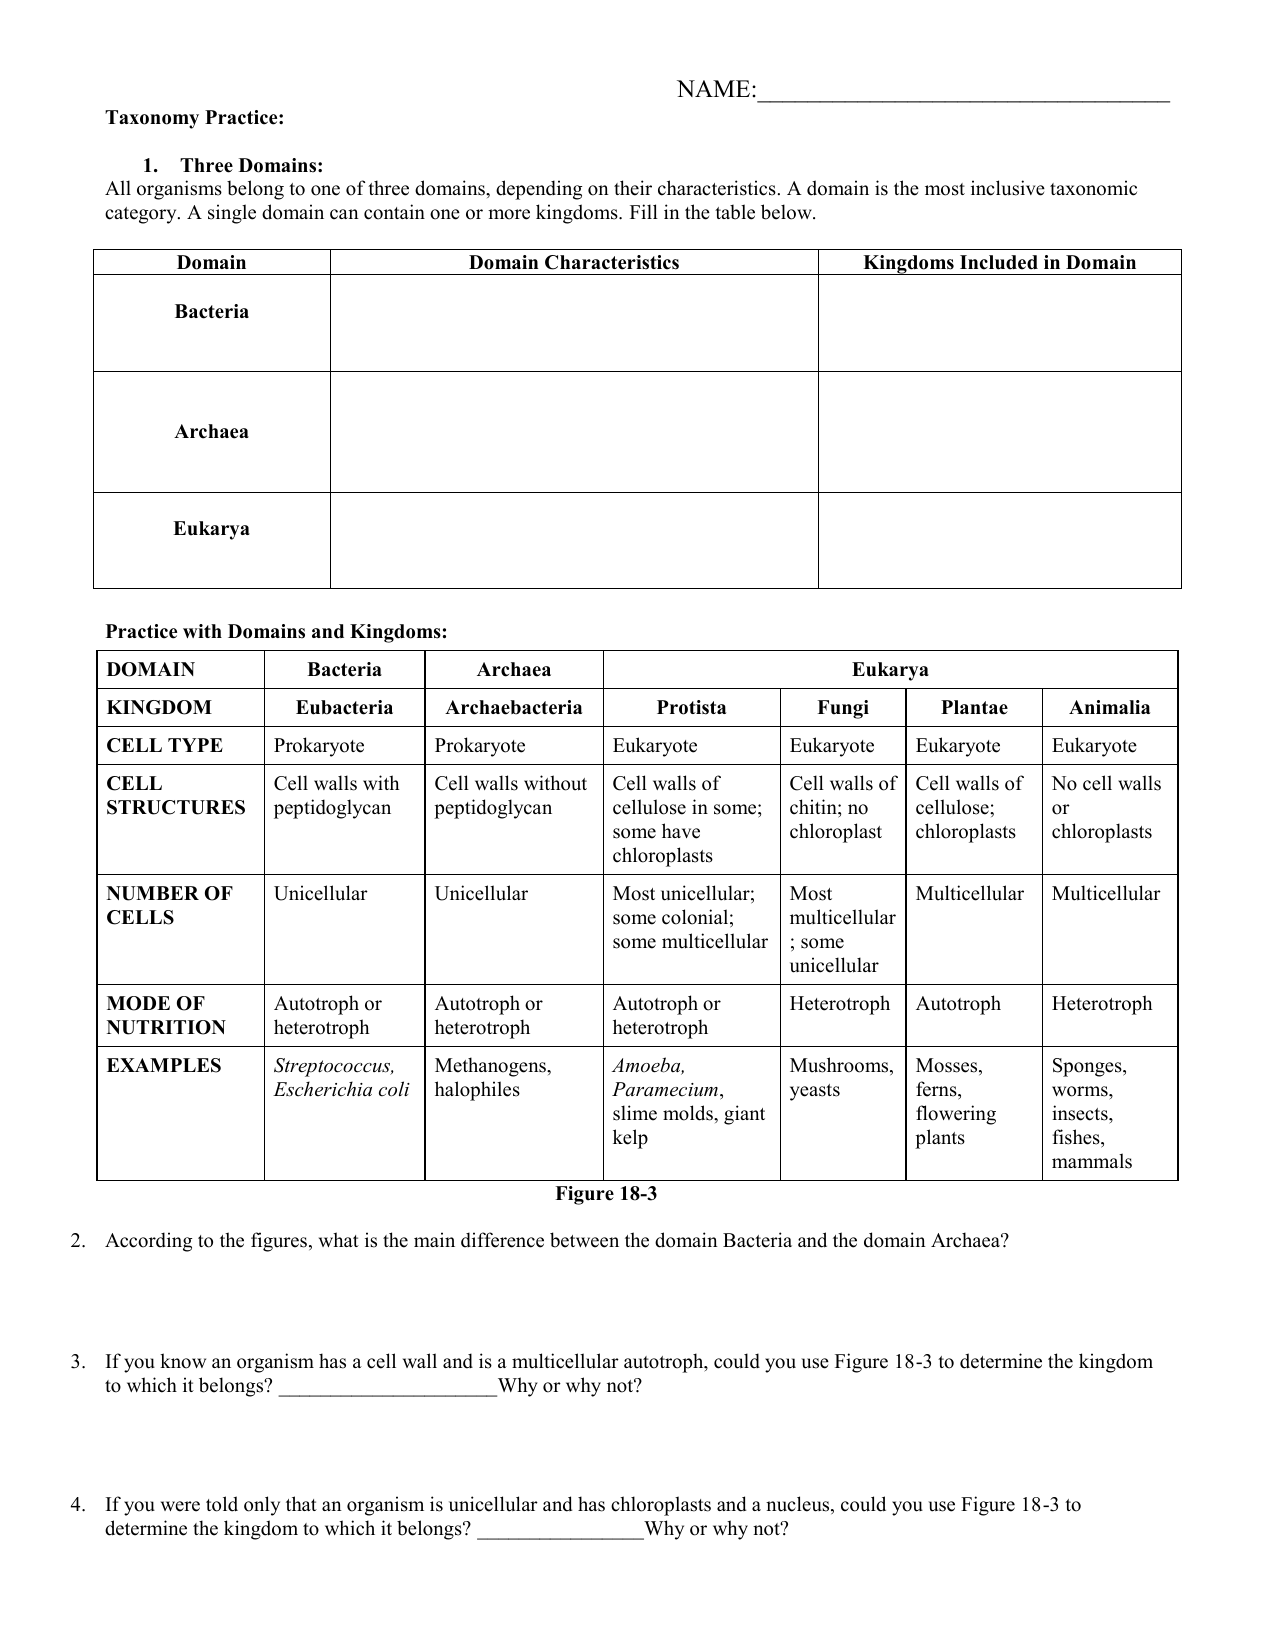 Domains Kingdoms and Classification 11-11 For Domains And Kingdoms Worksheet